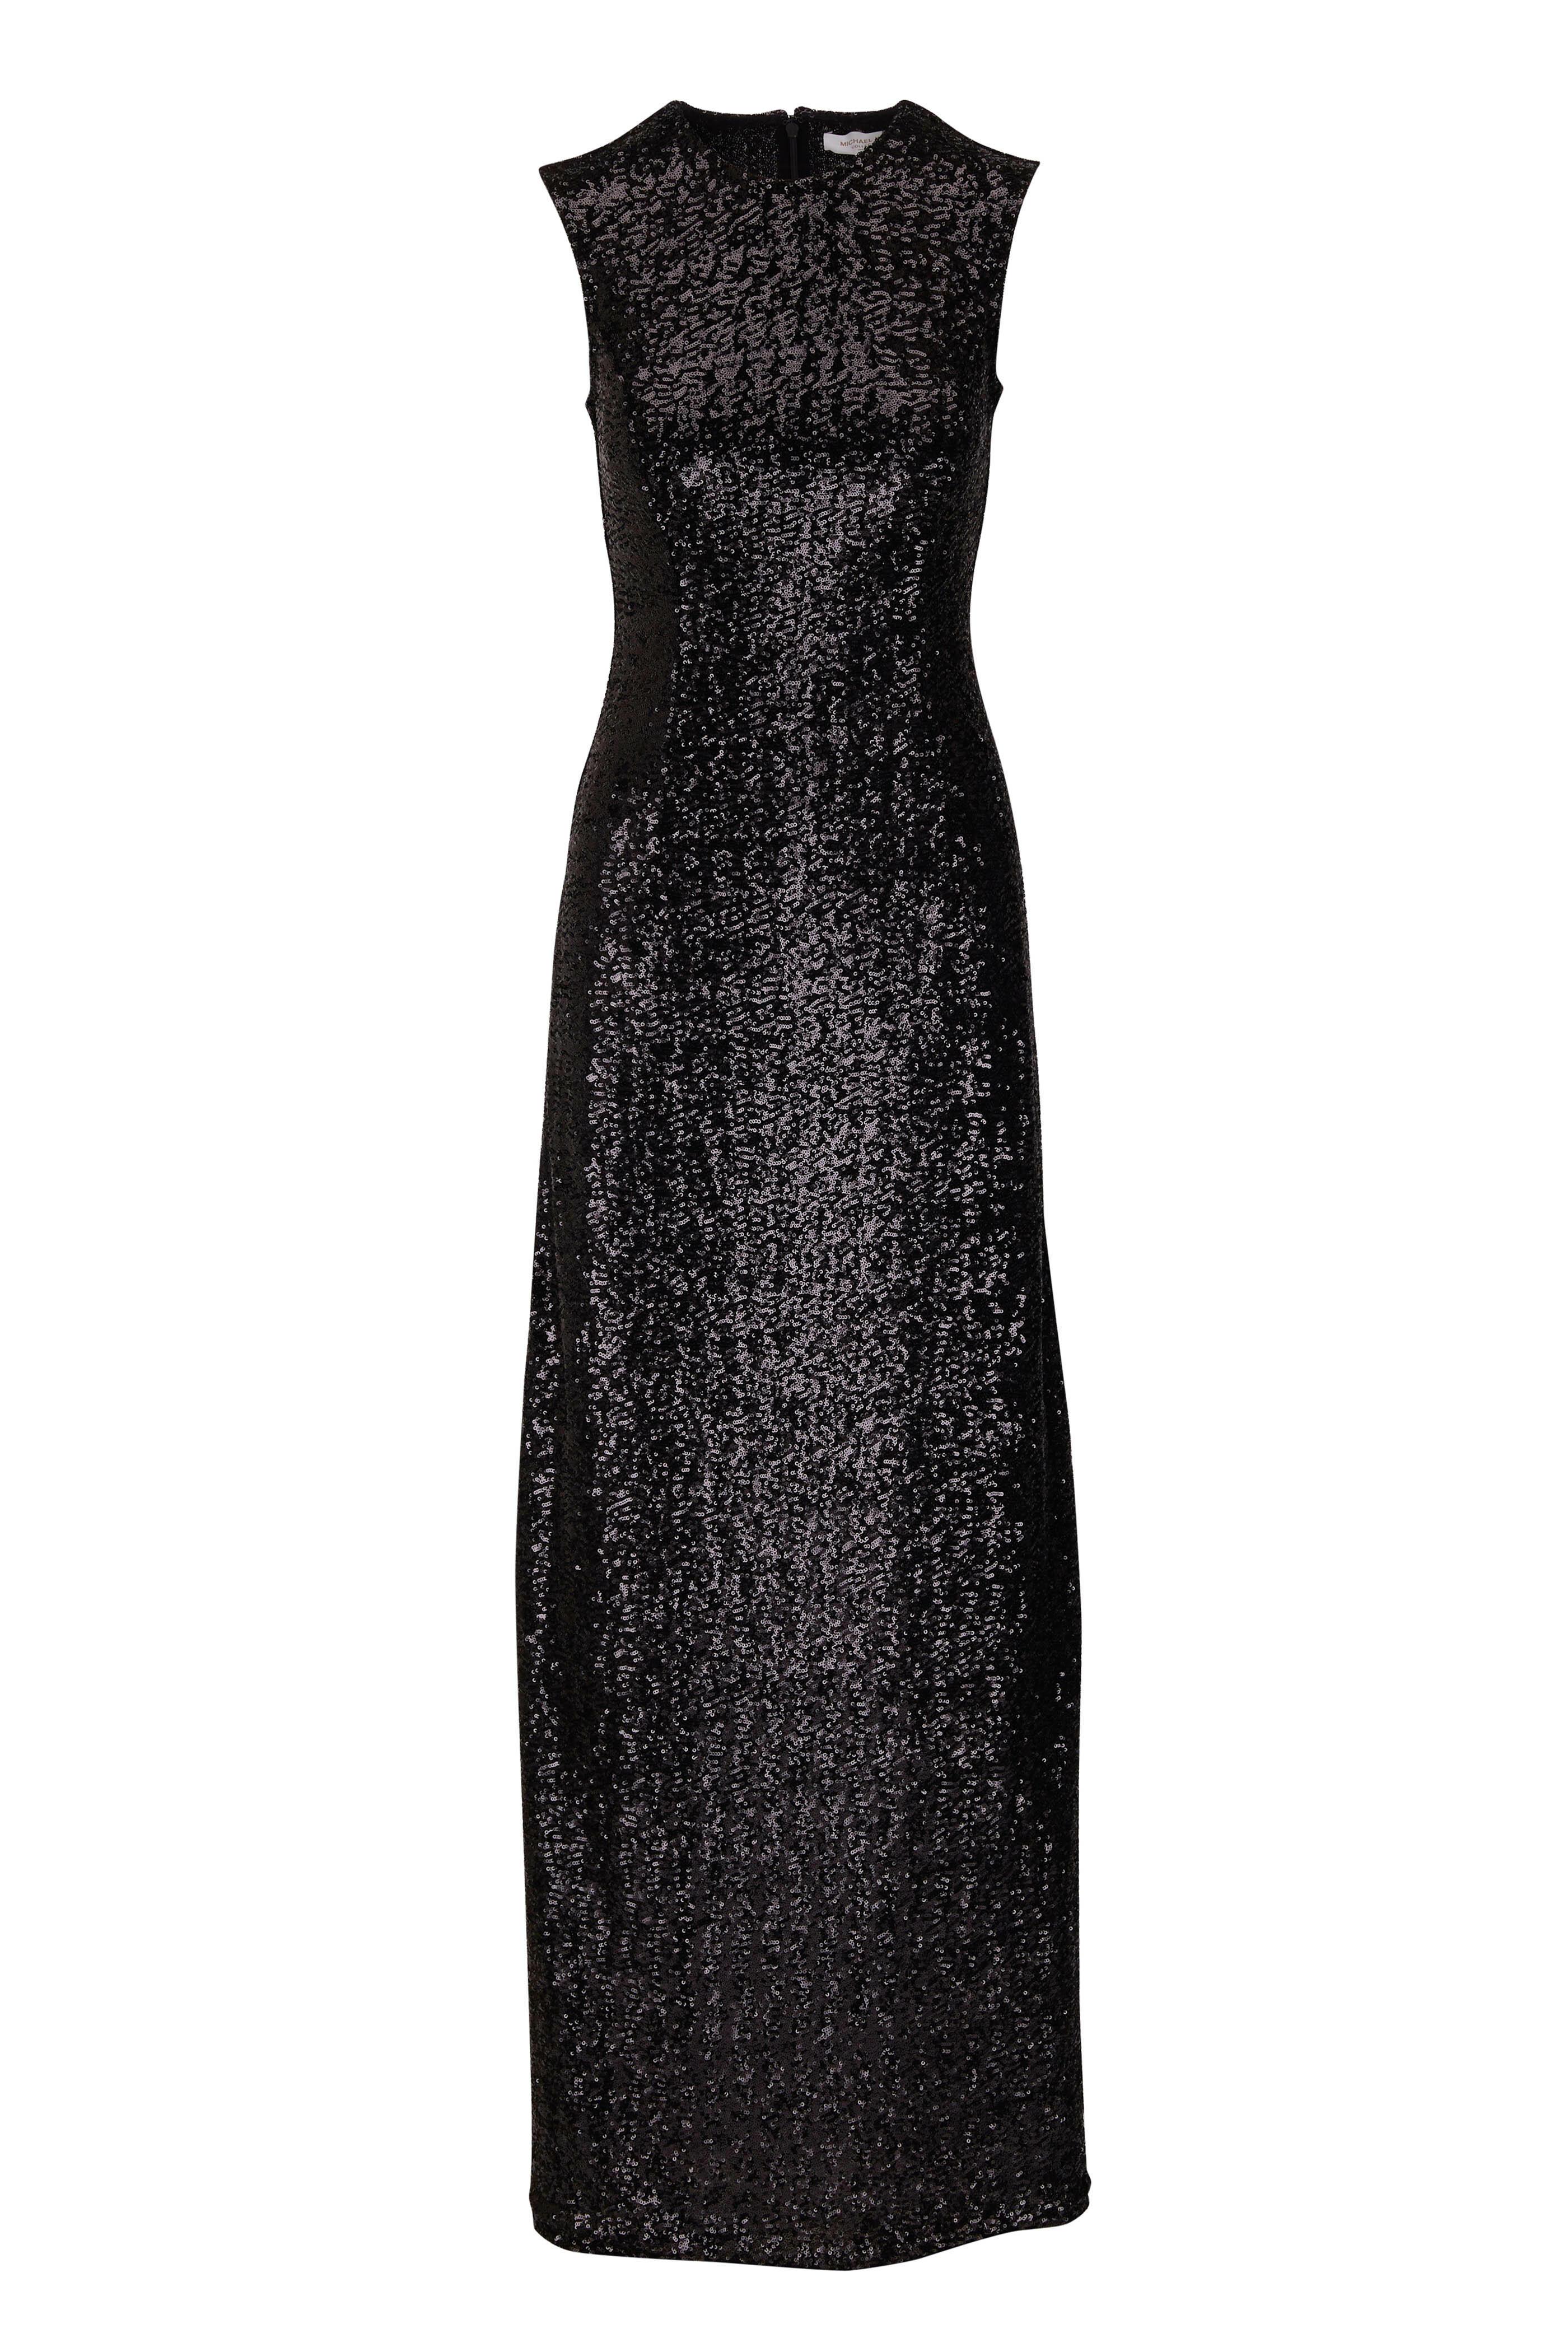 Michael Kors Collection - Black Sequin Gown | Mitchell Stores